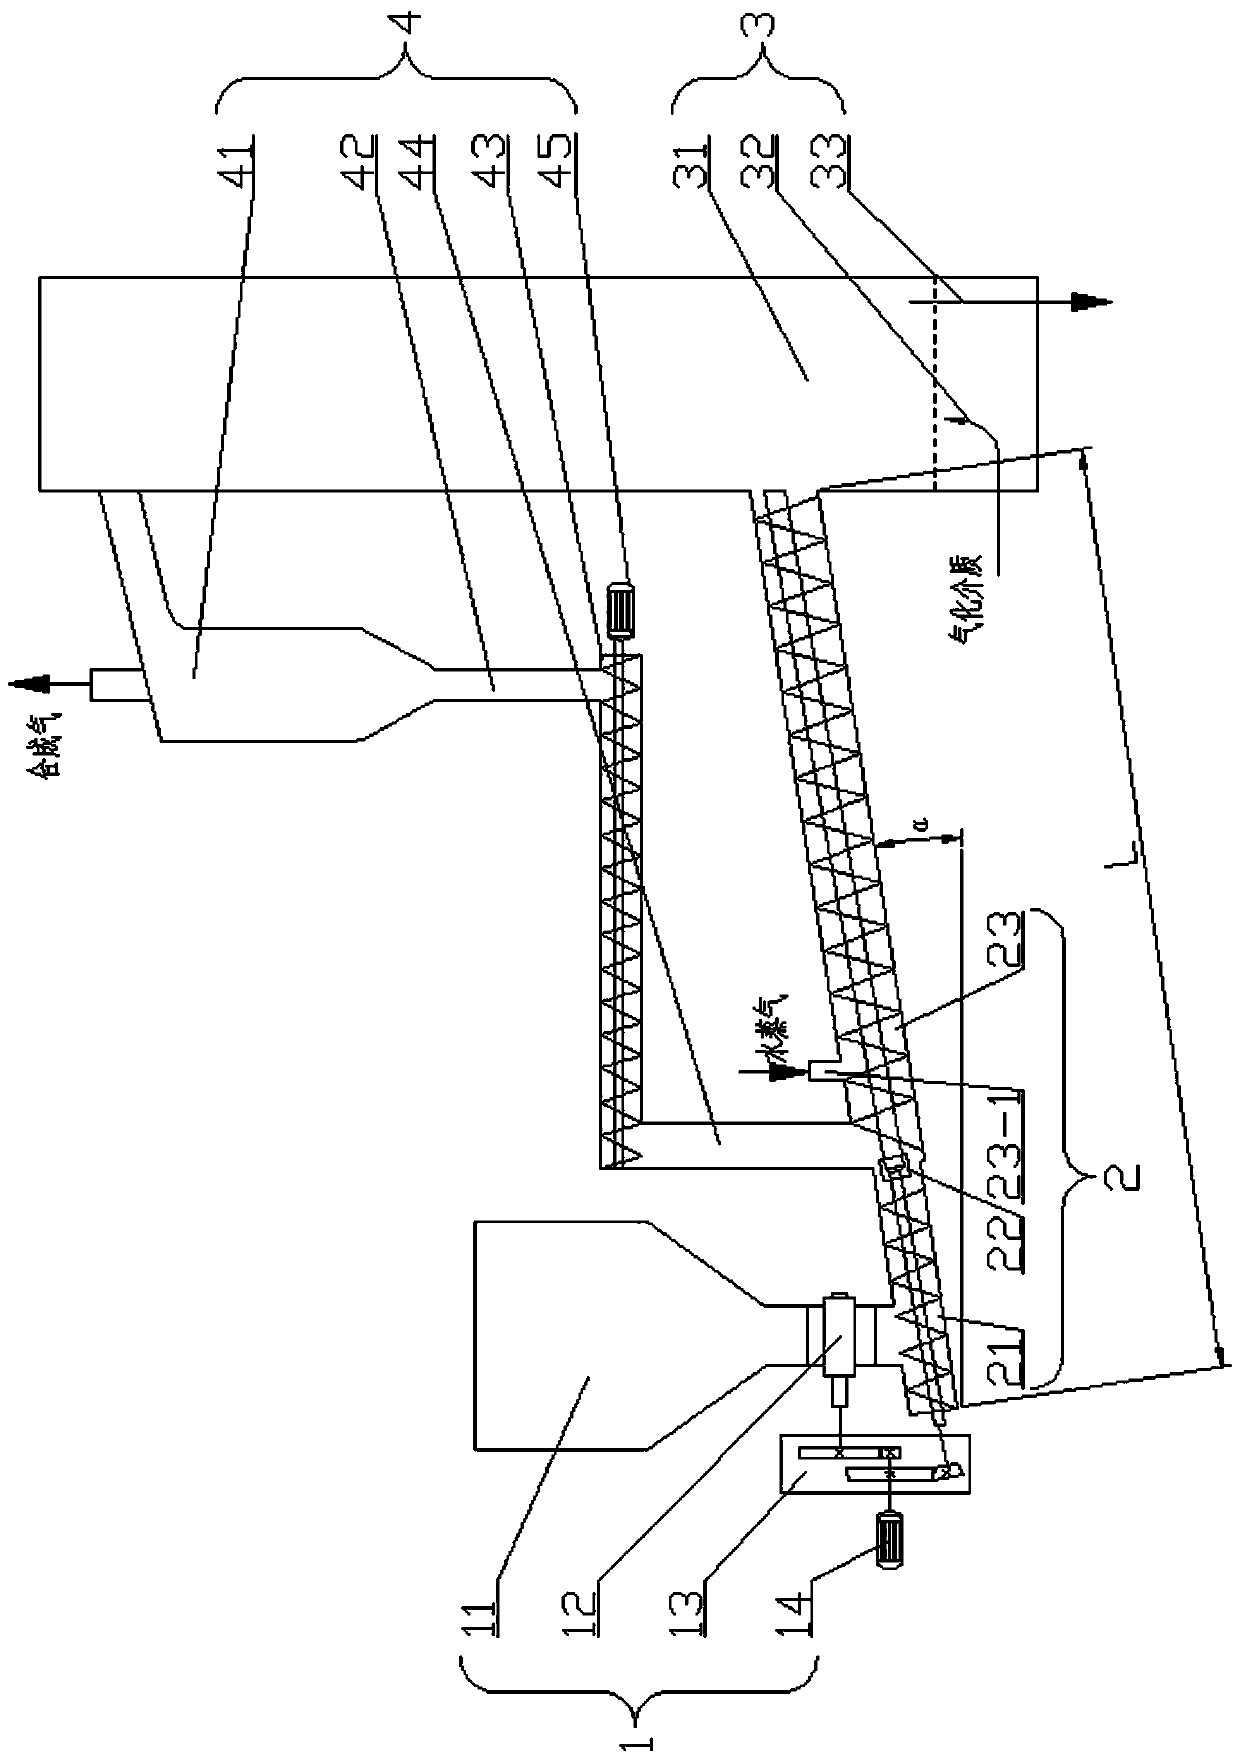 Low-temperature gasification device for low-order fuel based on spiral pyrolyzer and fluidized bed gasifier